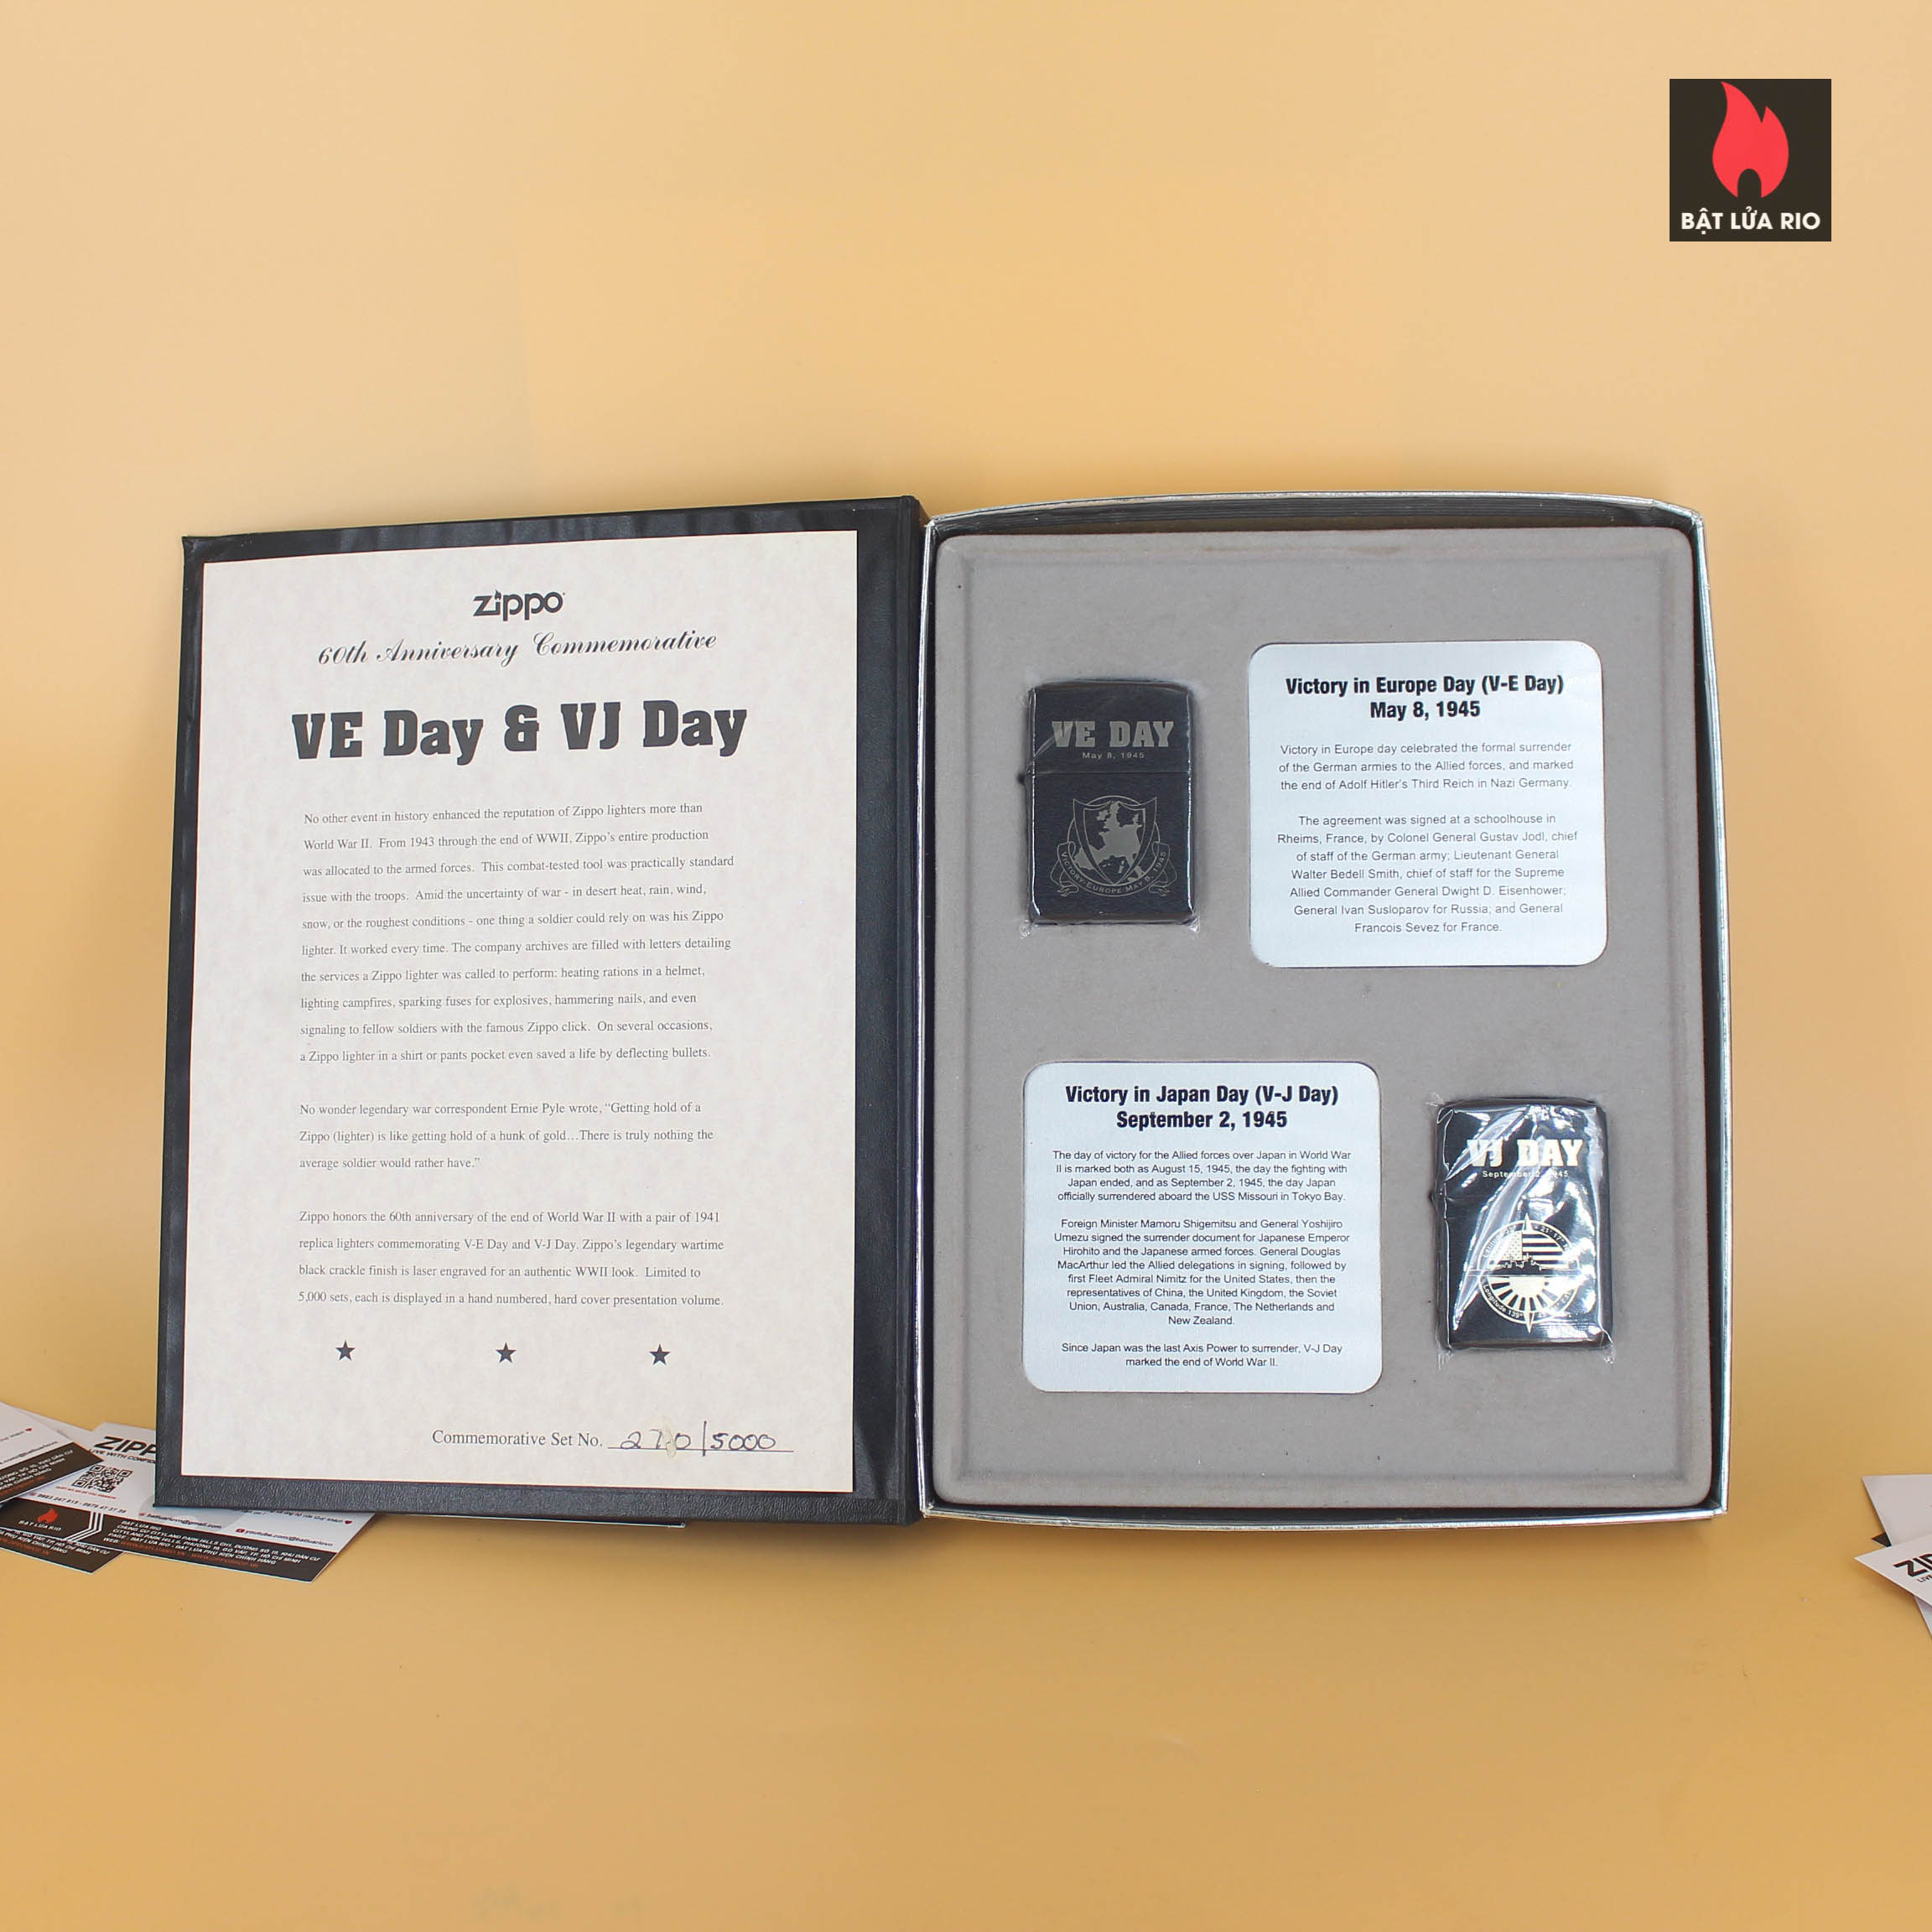 Set Zippo 2005 – Victory in Europe & Japan – WWII VE DAY & VJ DAY – 60th Anniversary 2